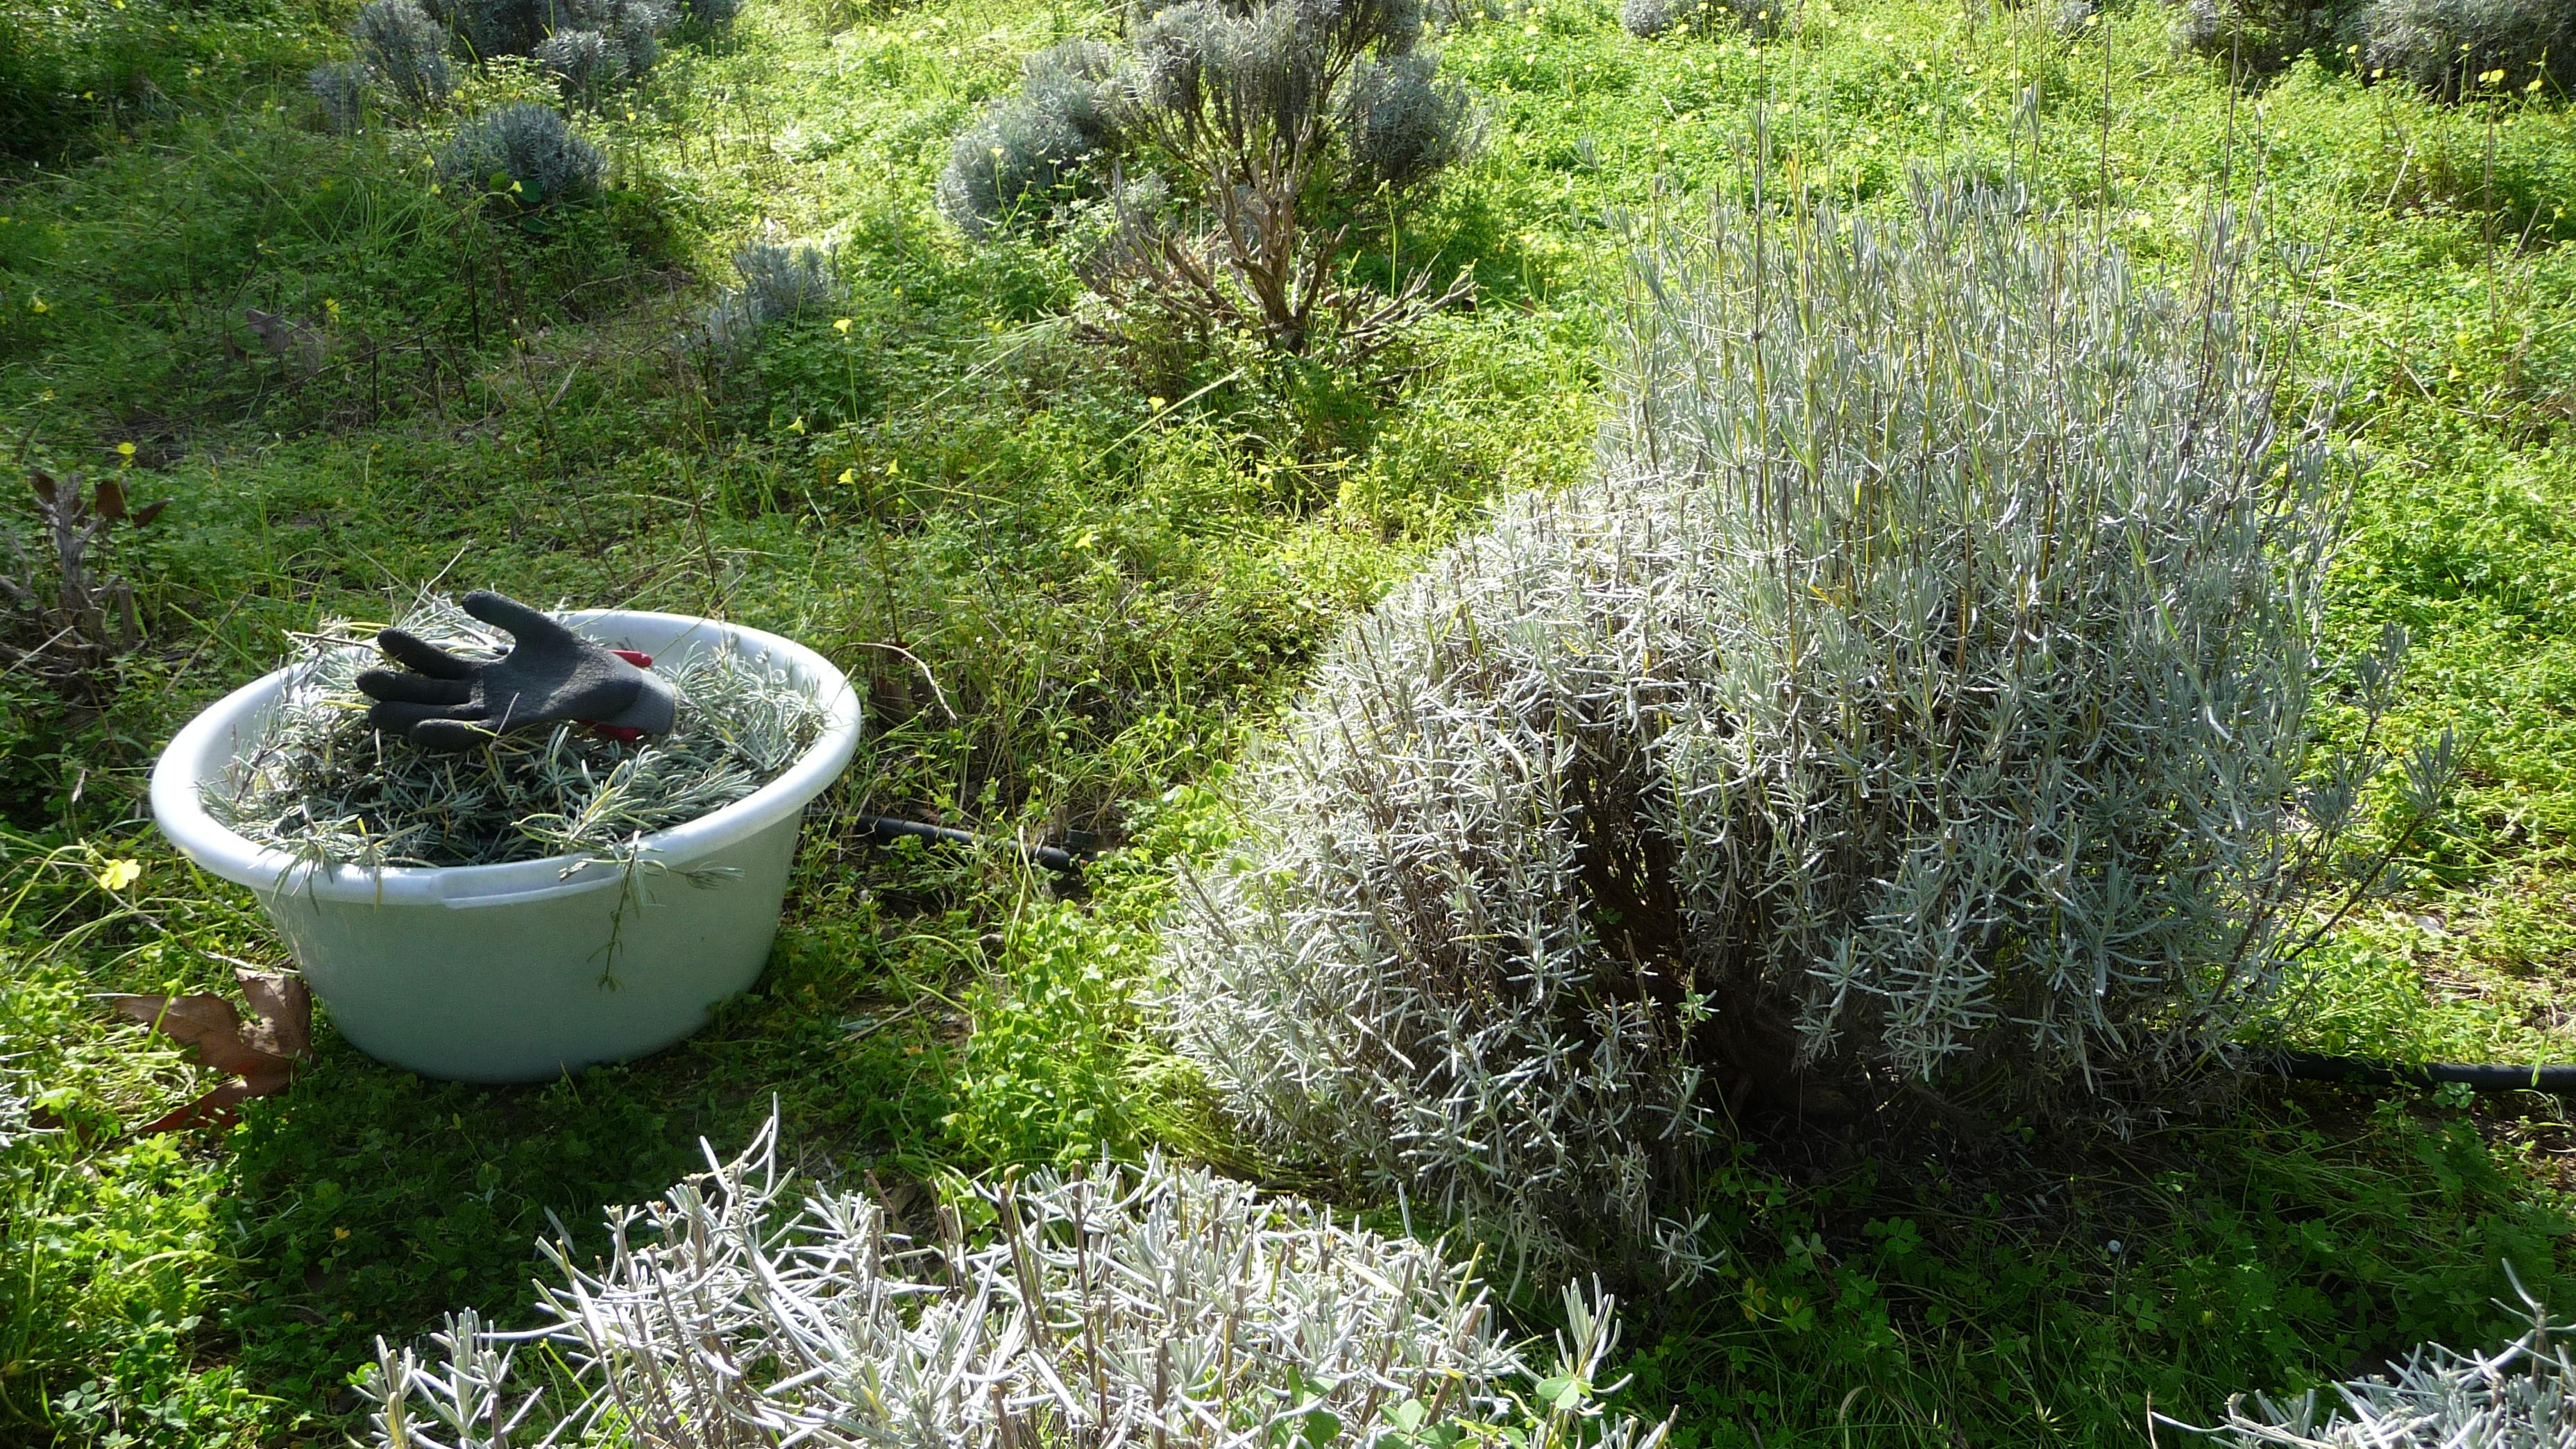 January is for pruning the bushes on the Cretan lavender farm